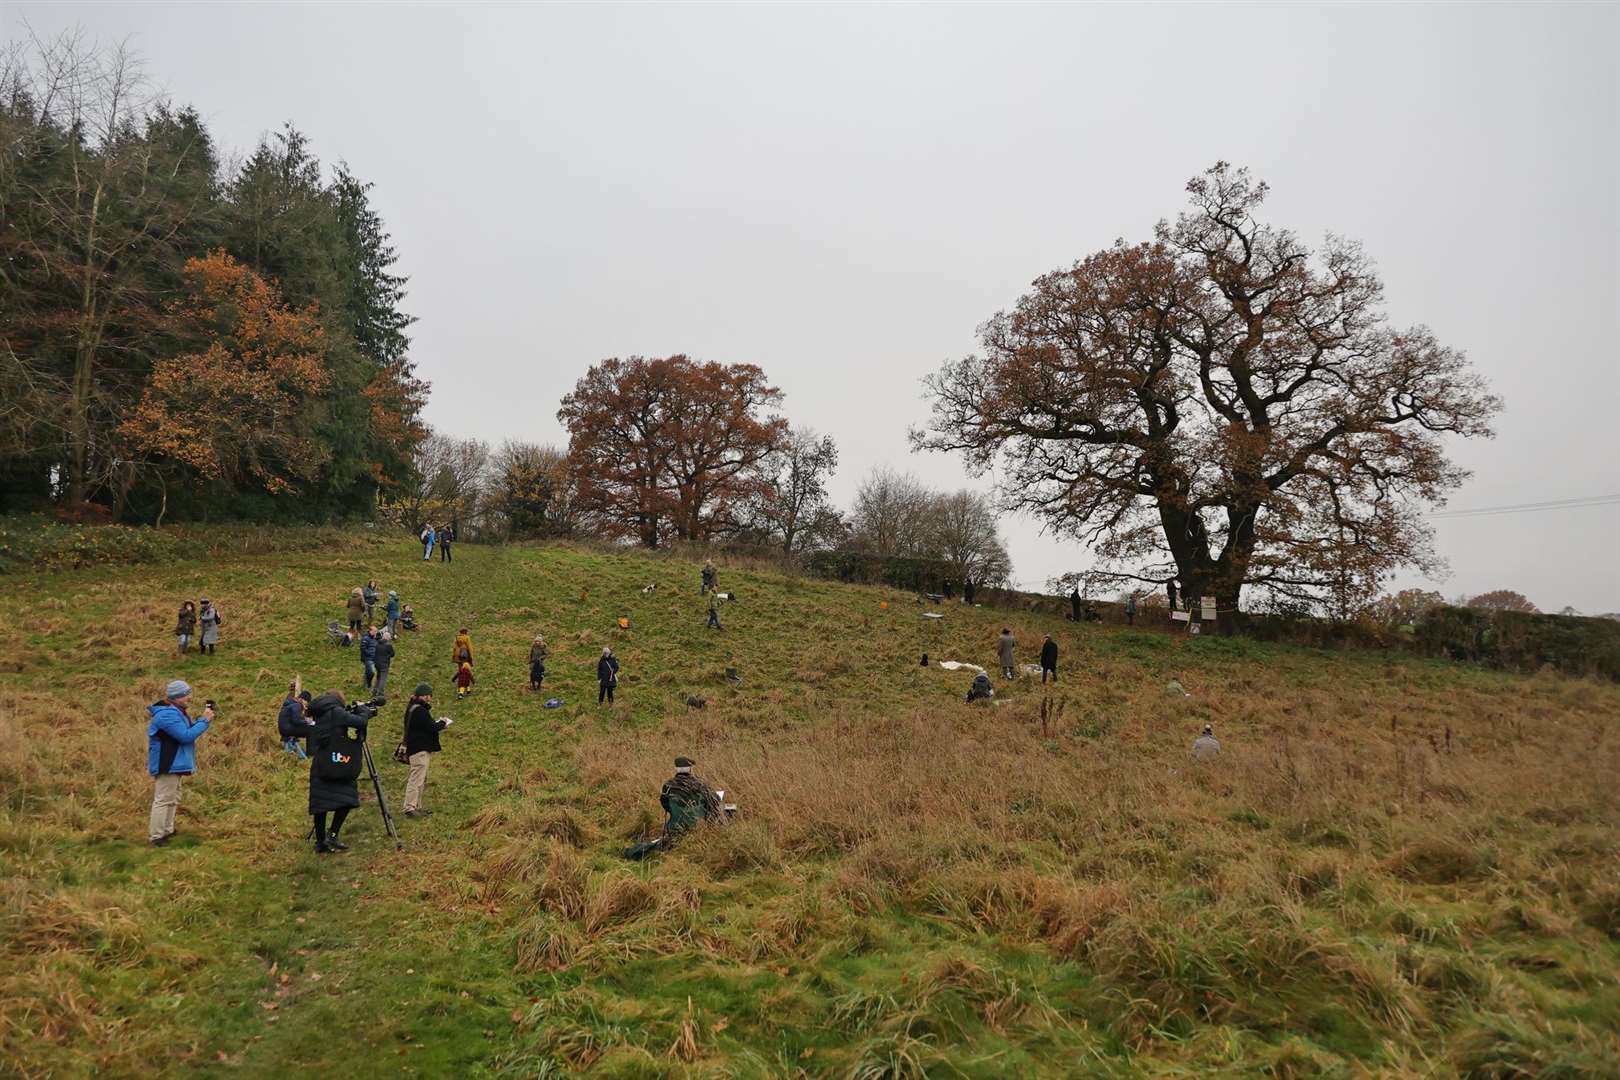 More than 50 people gathered to protest against the felling of the Darwin Oak (Chris Warrender/PA)